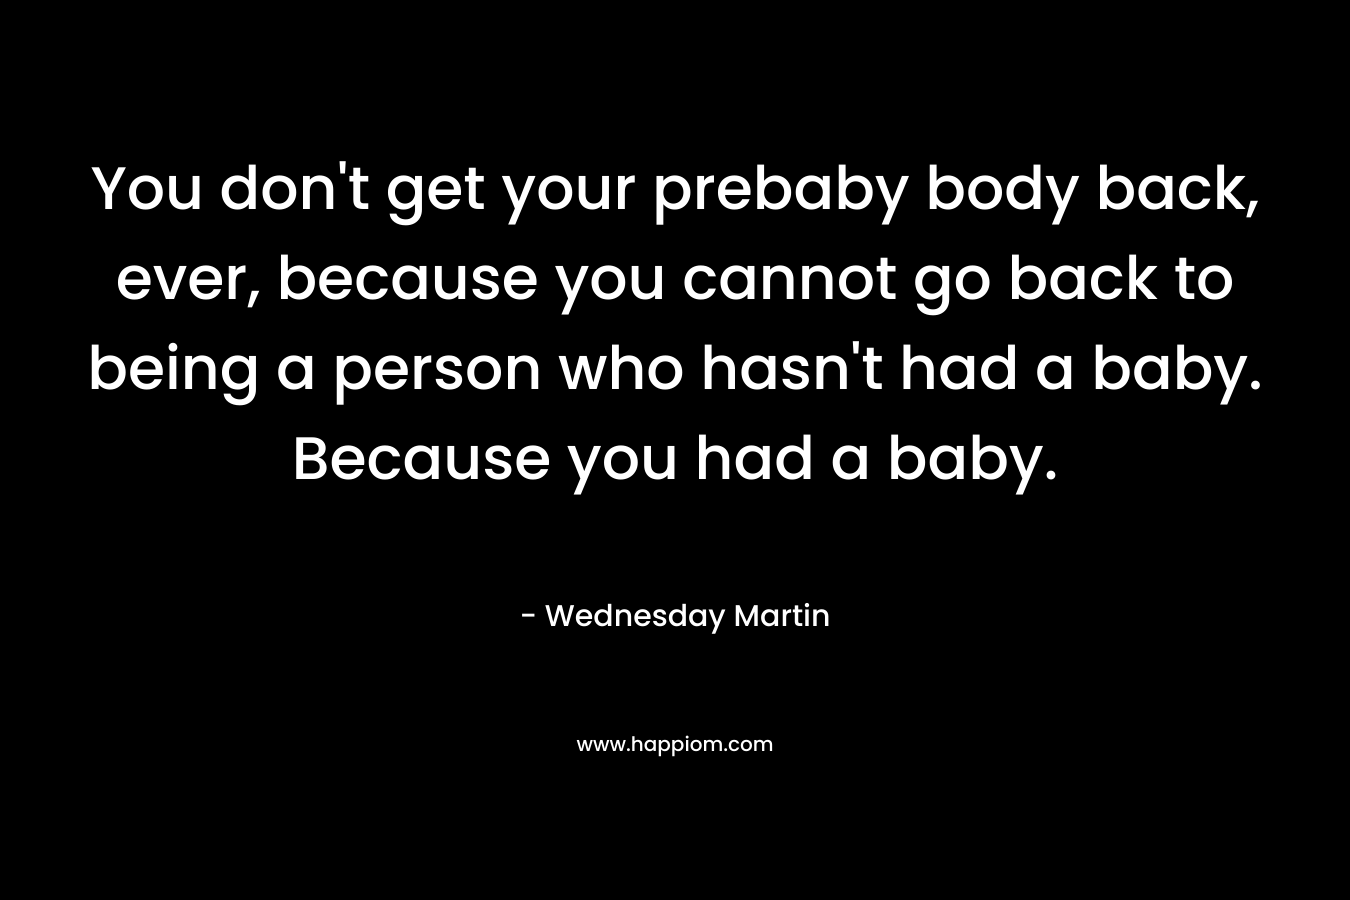 You don’t get your prebaby body back, ever, because you cannot go back to being a person who hasn’t had a baby. Because you had a baby. – Wednesday Martin